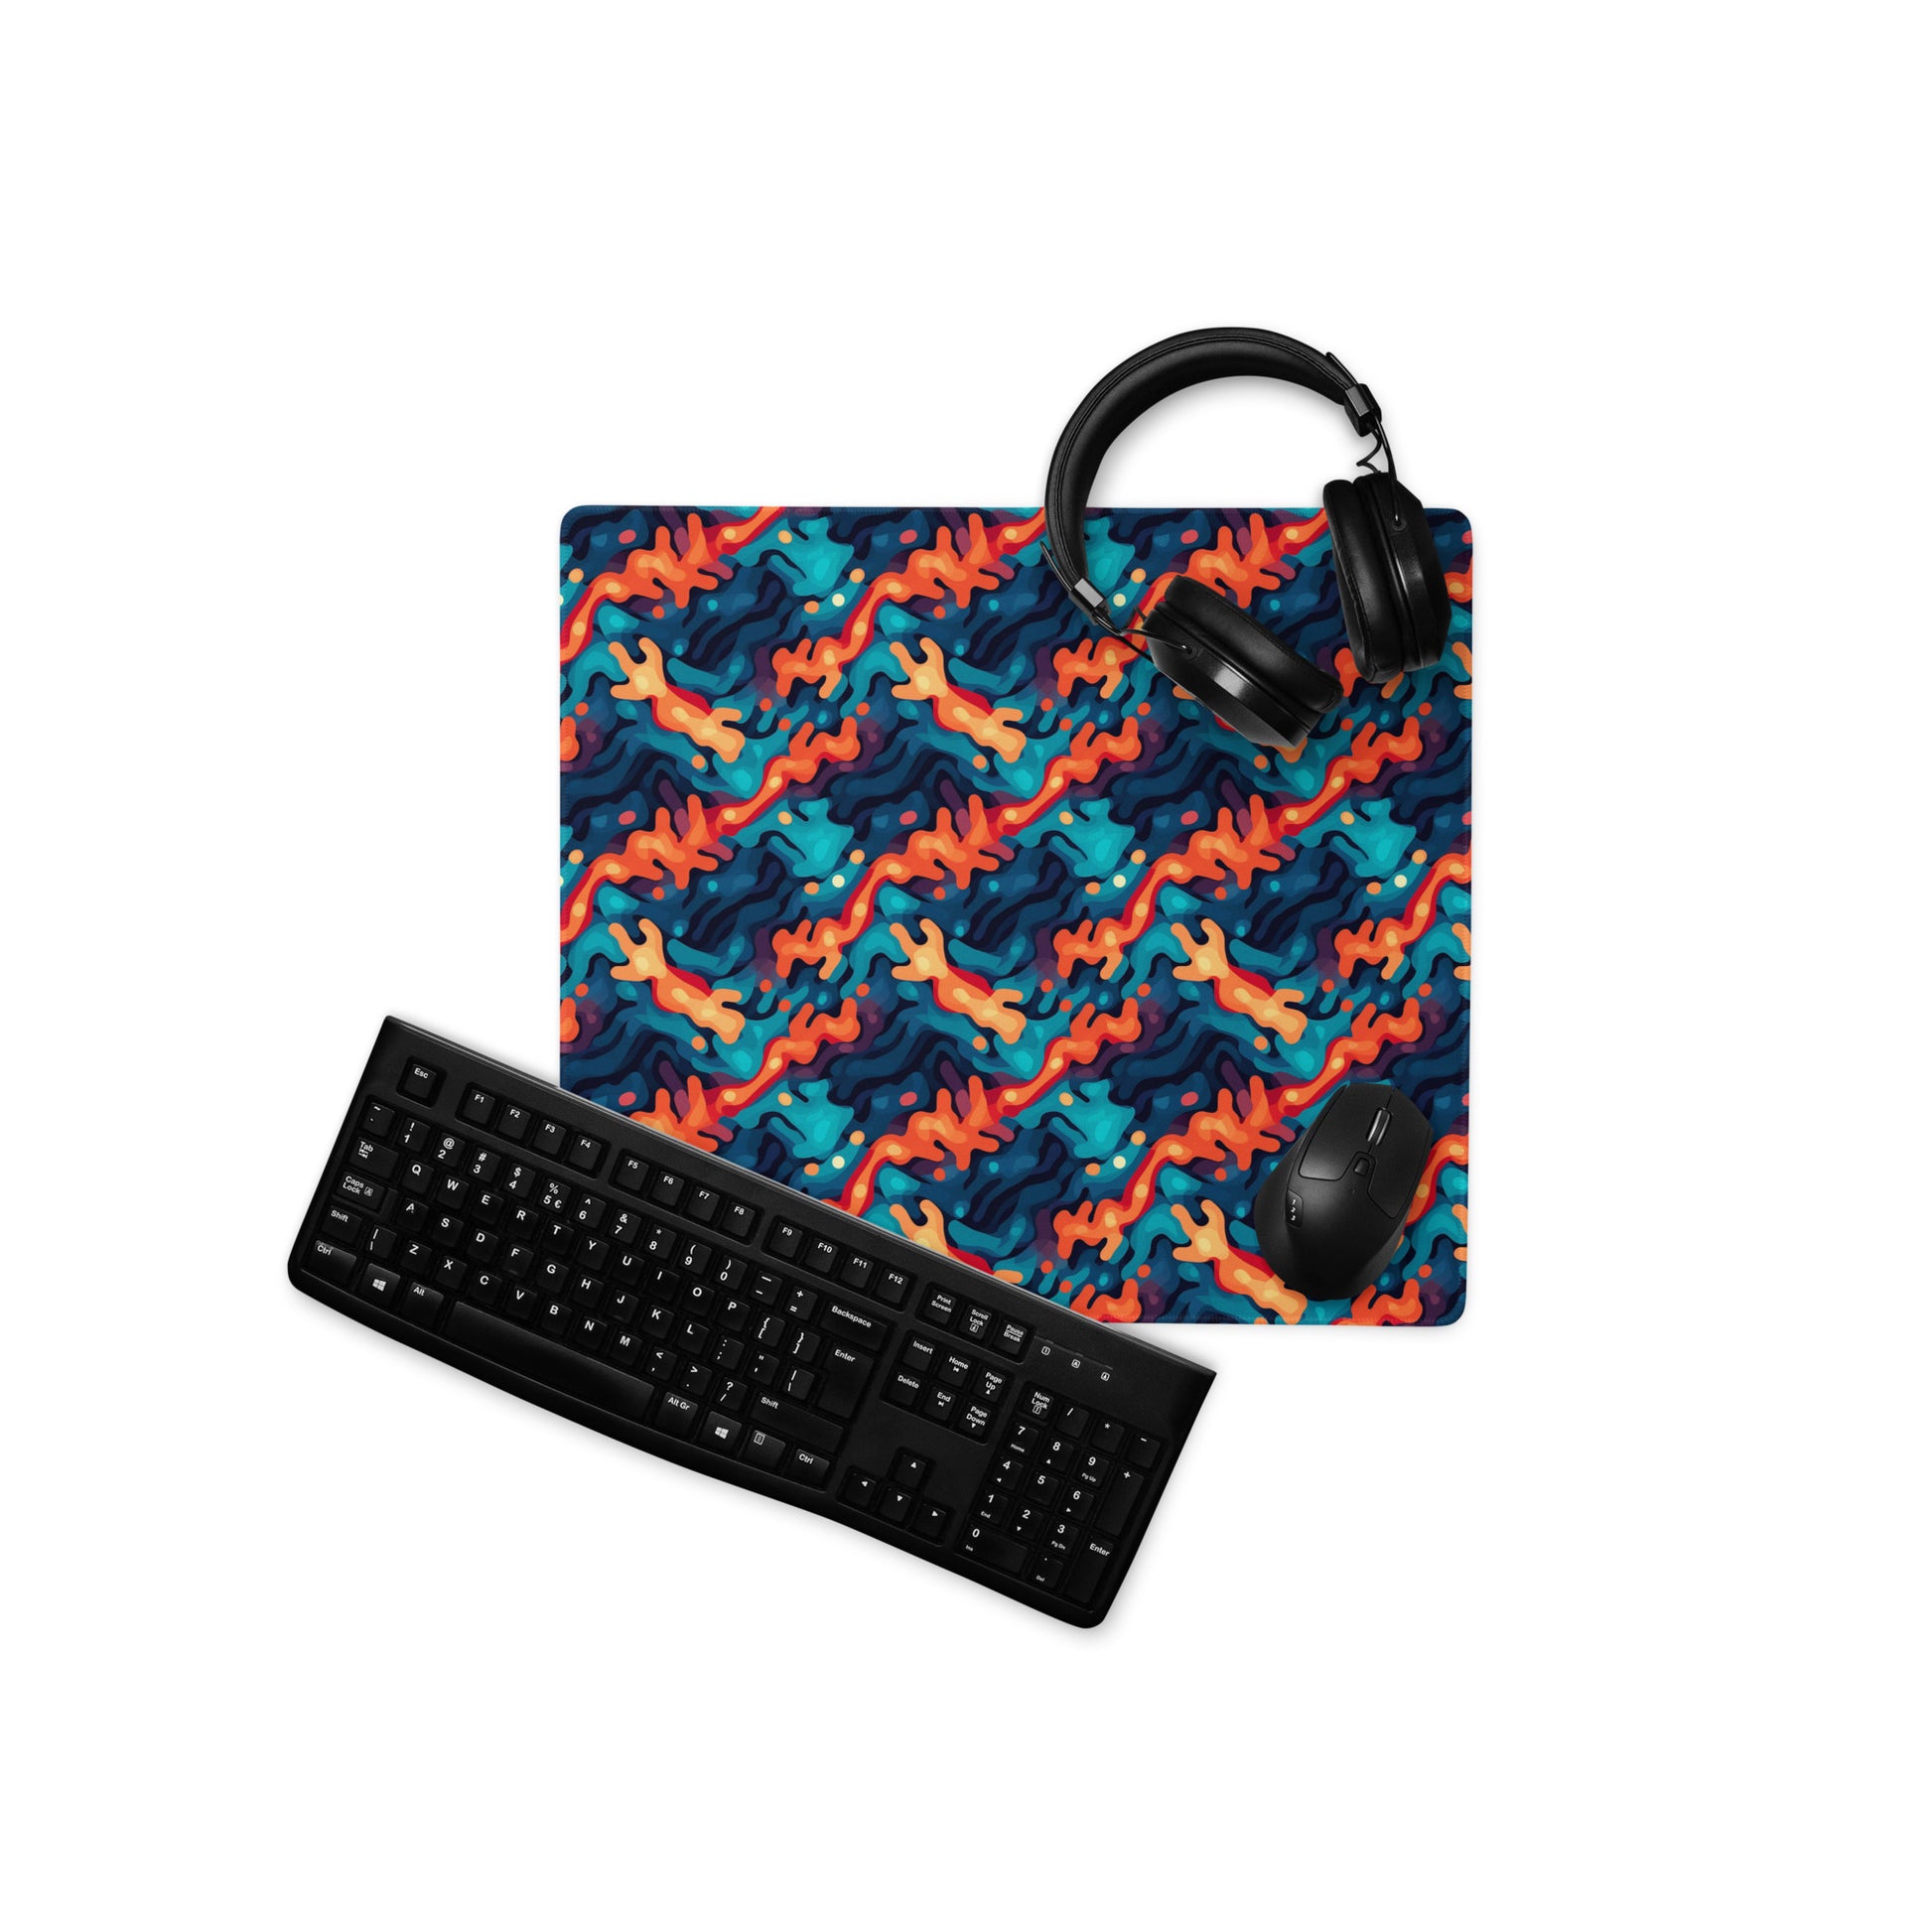 A 18" x 16" desk pad with a wavy woven pattern on it displayed with a keyboard, headphones an a mouse. Red and Blue in color.